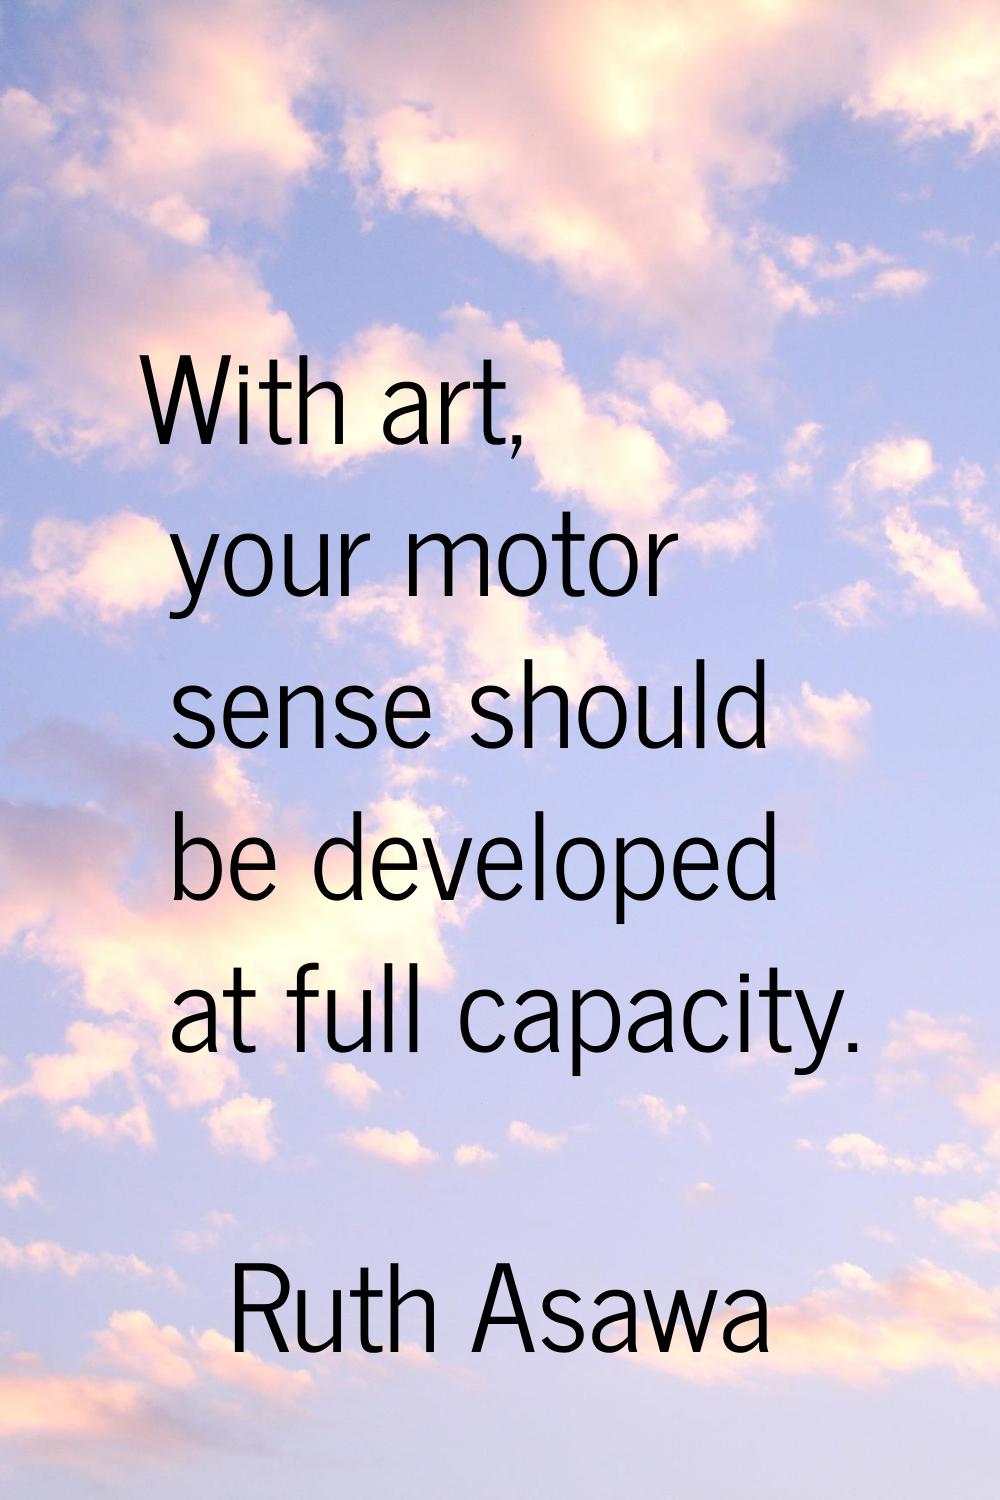 With art, your motor sense should be developed at full capacity.